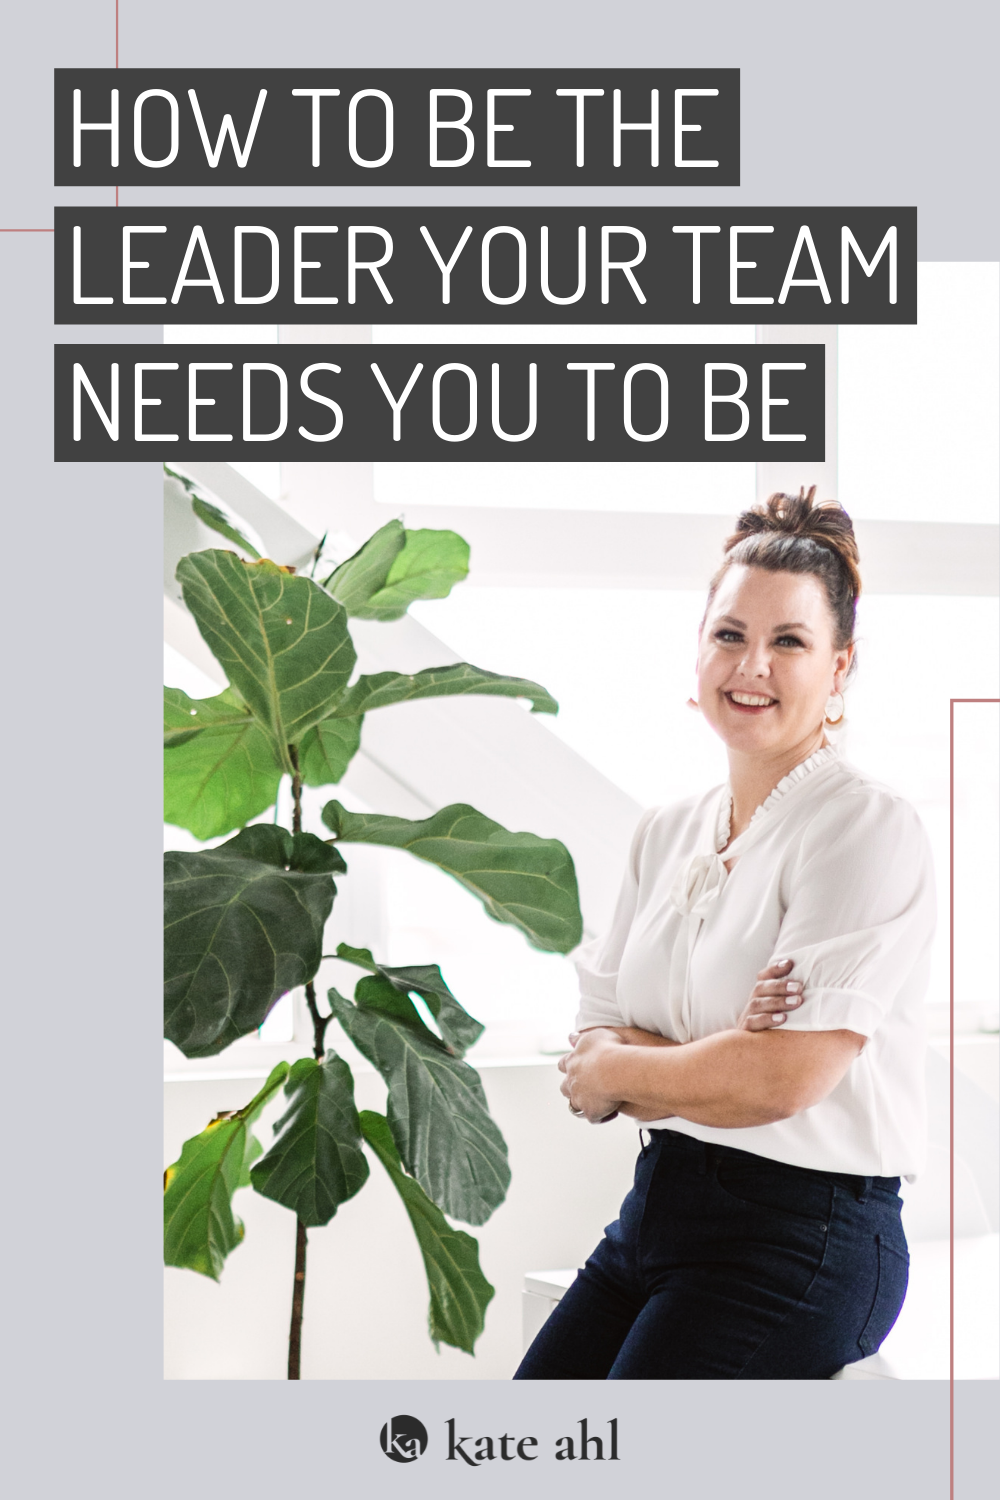 Image of Kate Ahl that says how to be the leader your team needs you to be